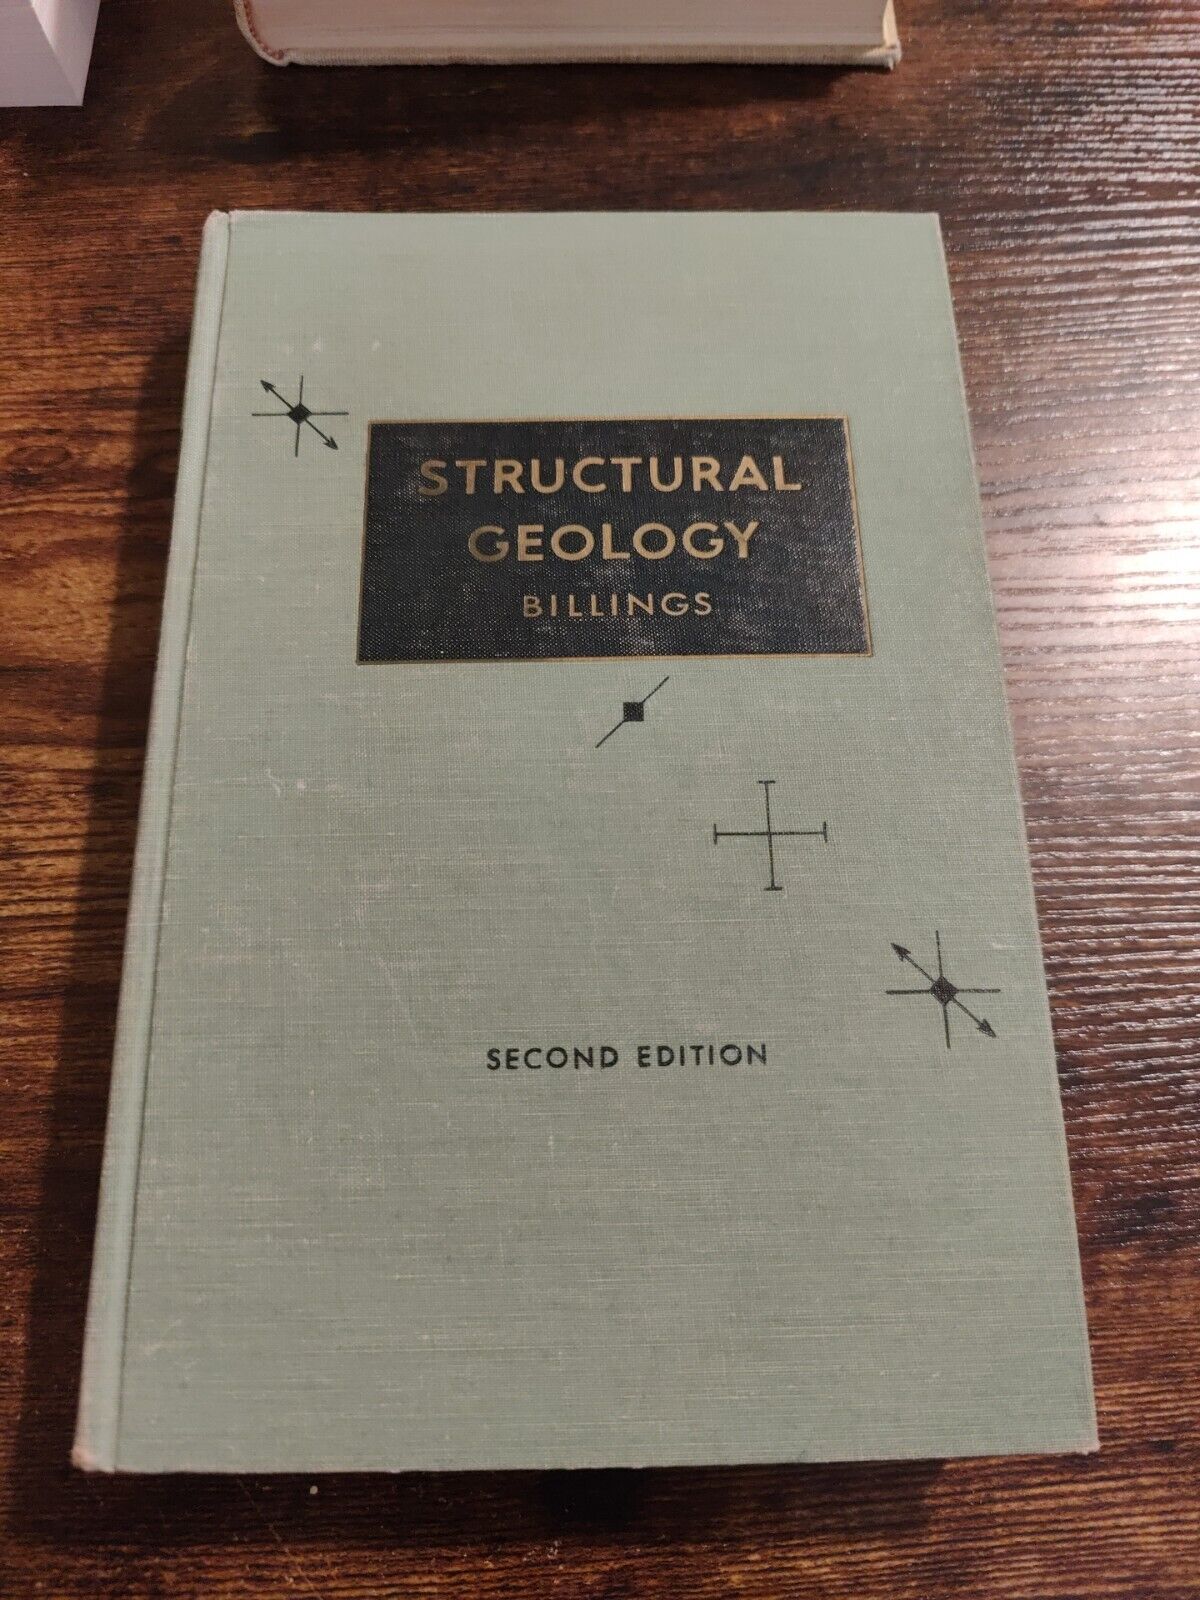 1954 Vintage Book: Structural Geology By Maryland Billings